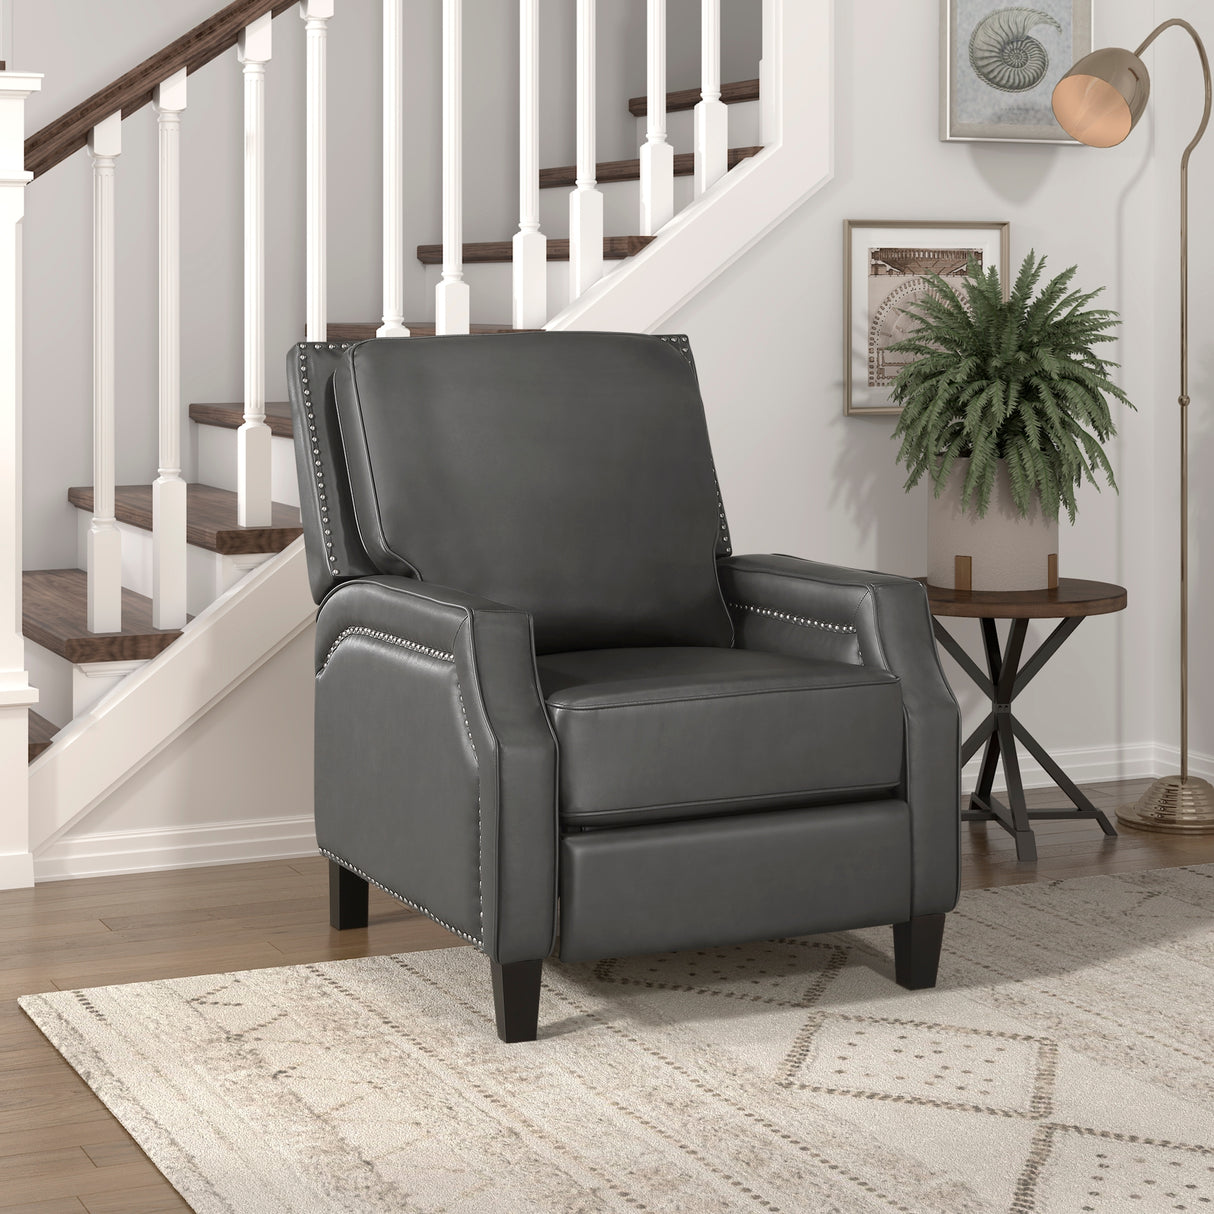 Push Back Reclining Chair Transitional Style Grey Color Self-Reclining Motion Chair 1pc Cushion Seat Modern Living Room Furniture - Home Elegance USA